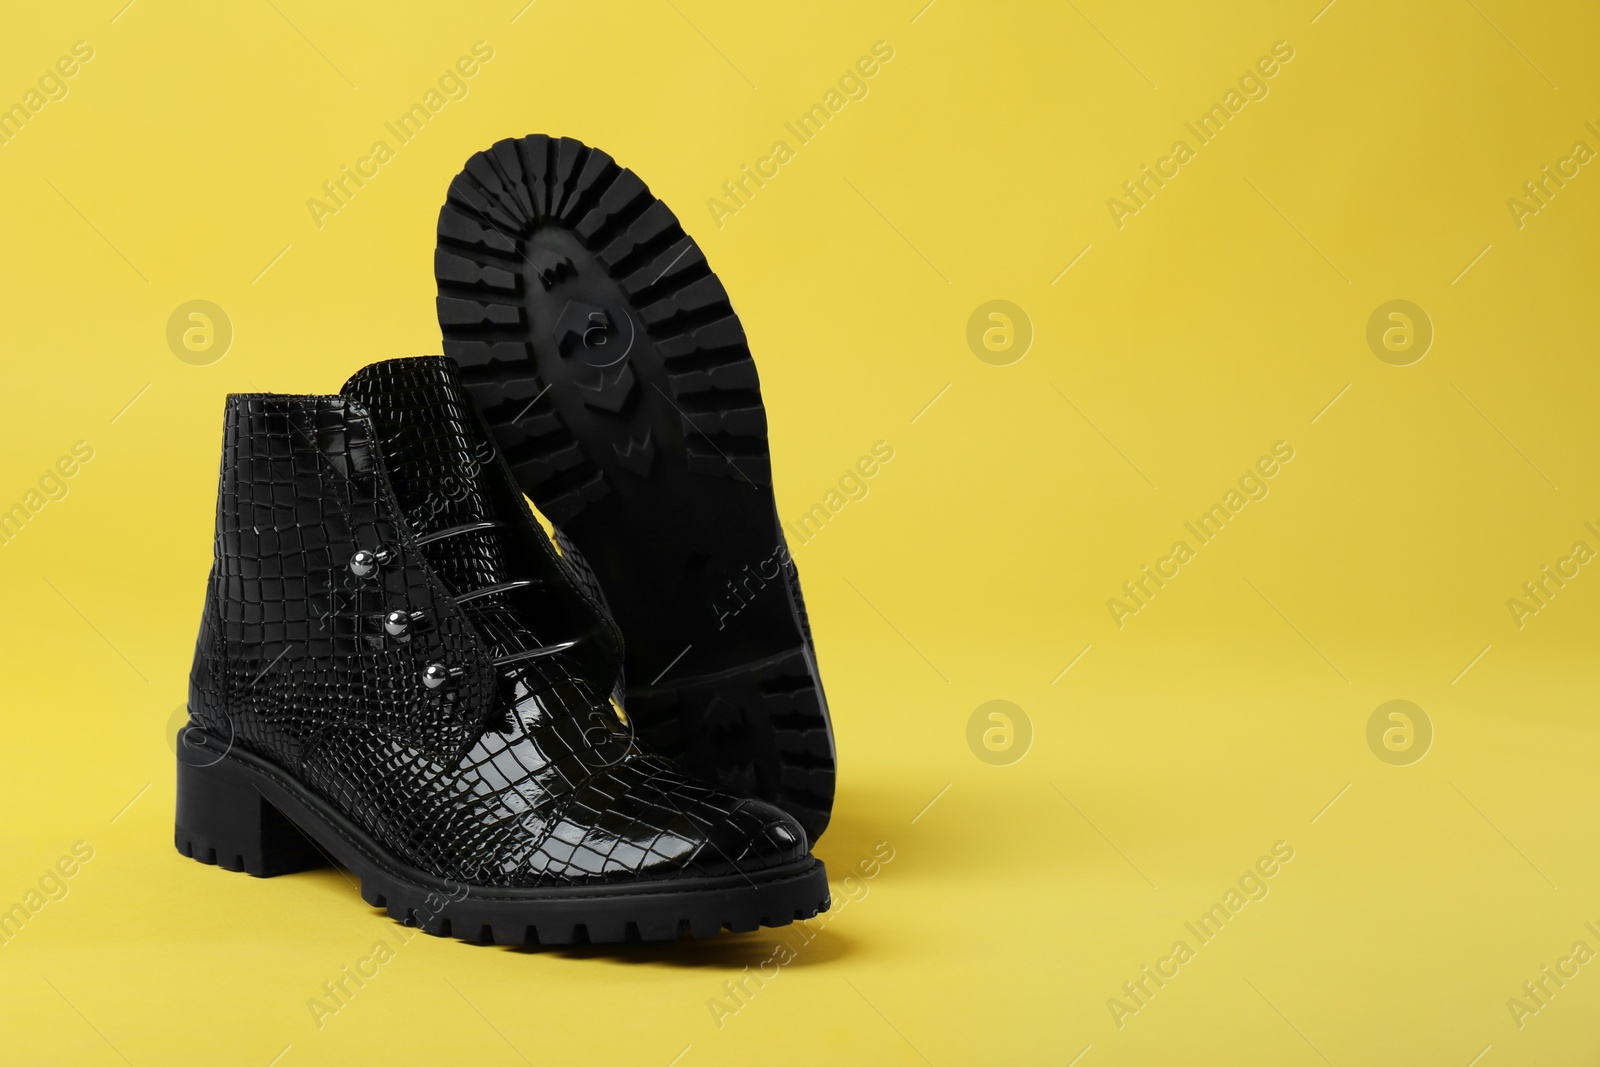 Photo of Pair of stylish ankle boots on yellow background. Space for text